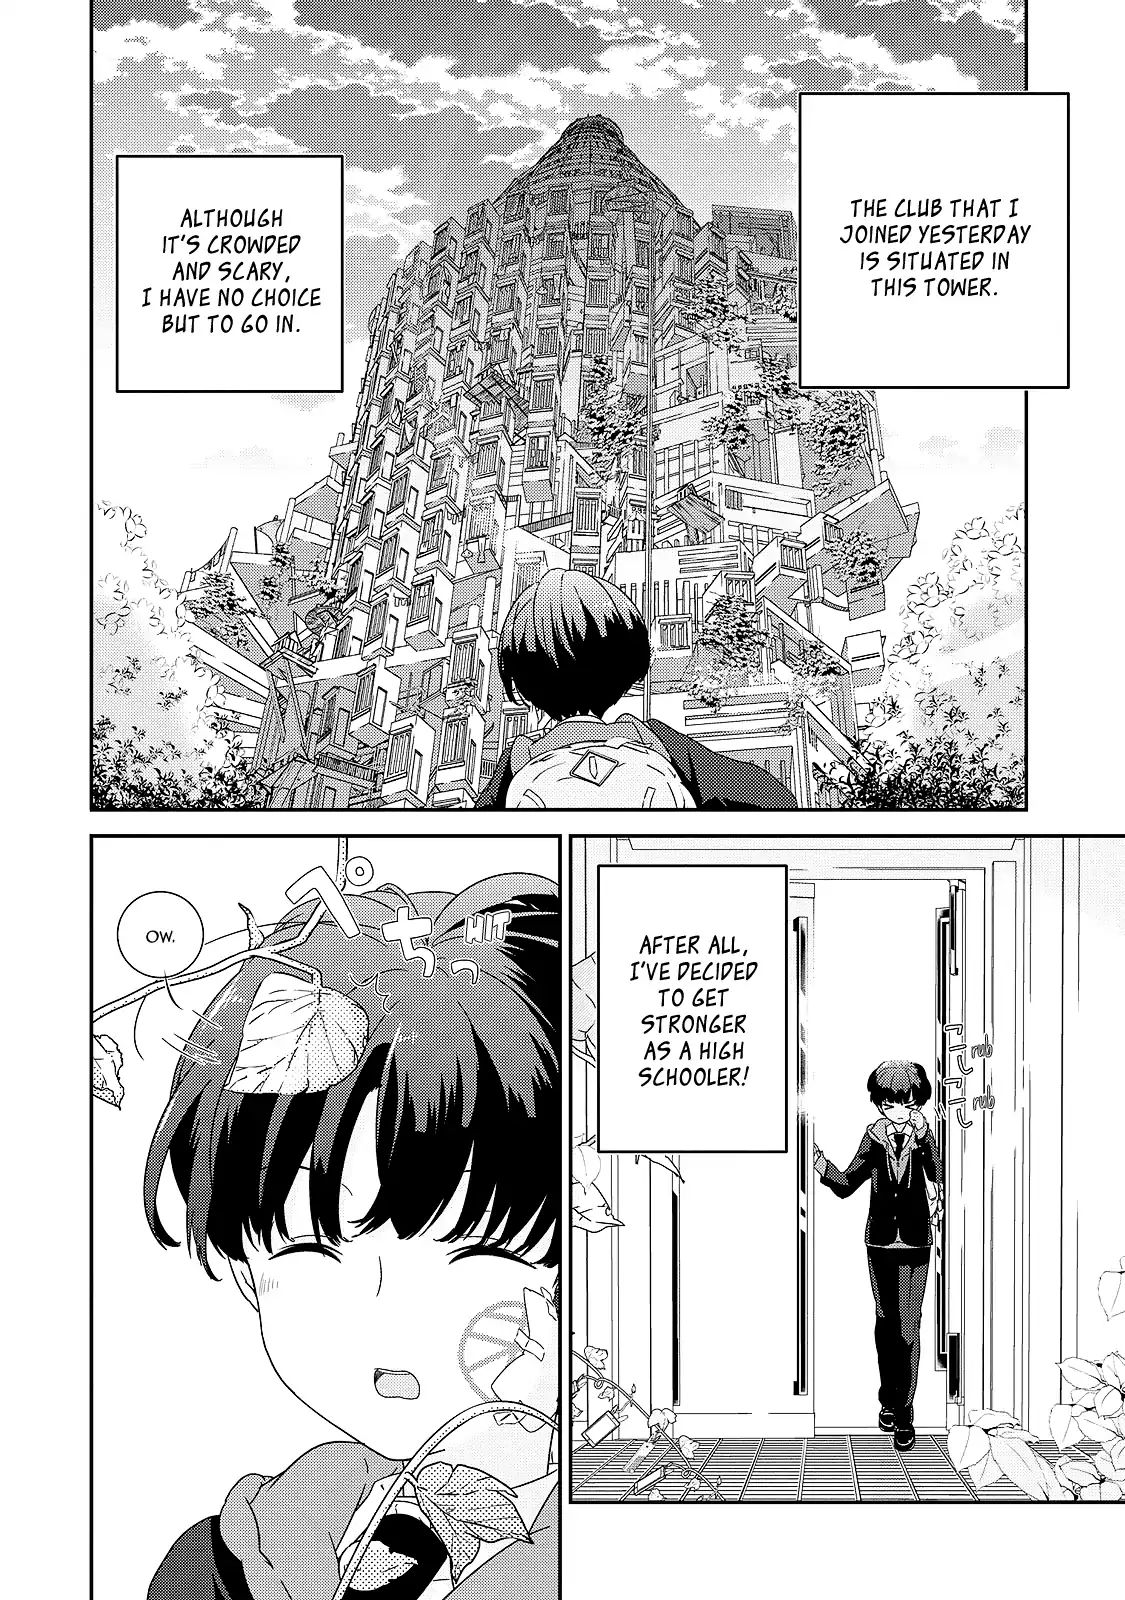 The Female God Of Babel: Kamisama Club In Tower Of Babel Chapter 2 #6